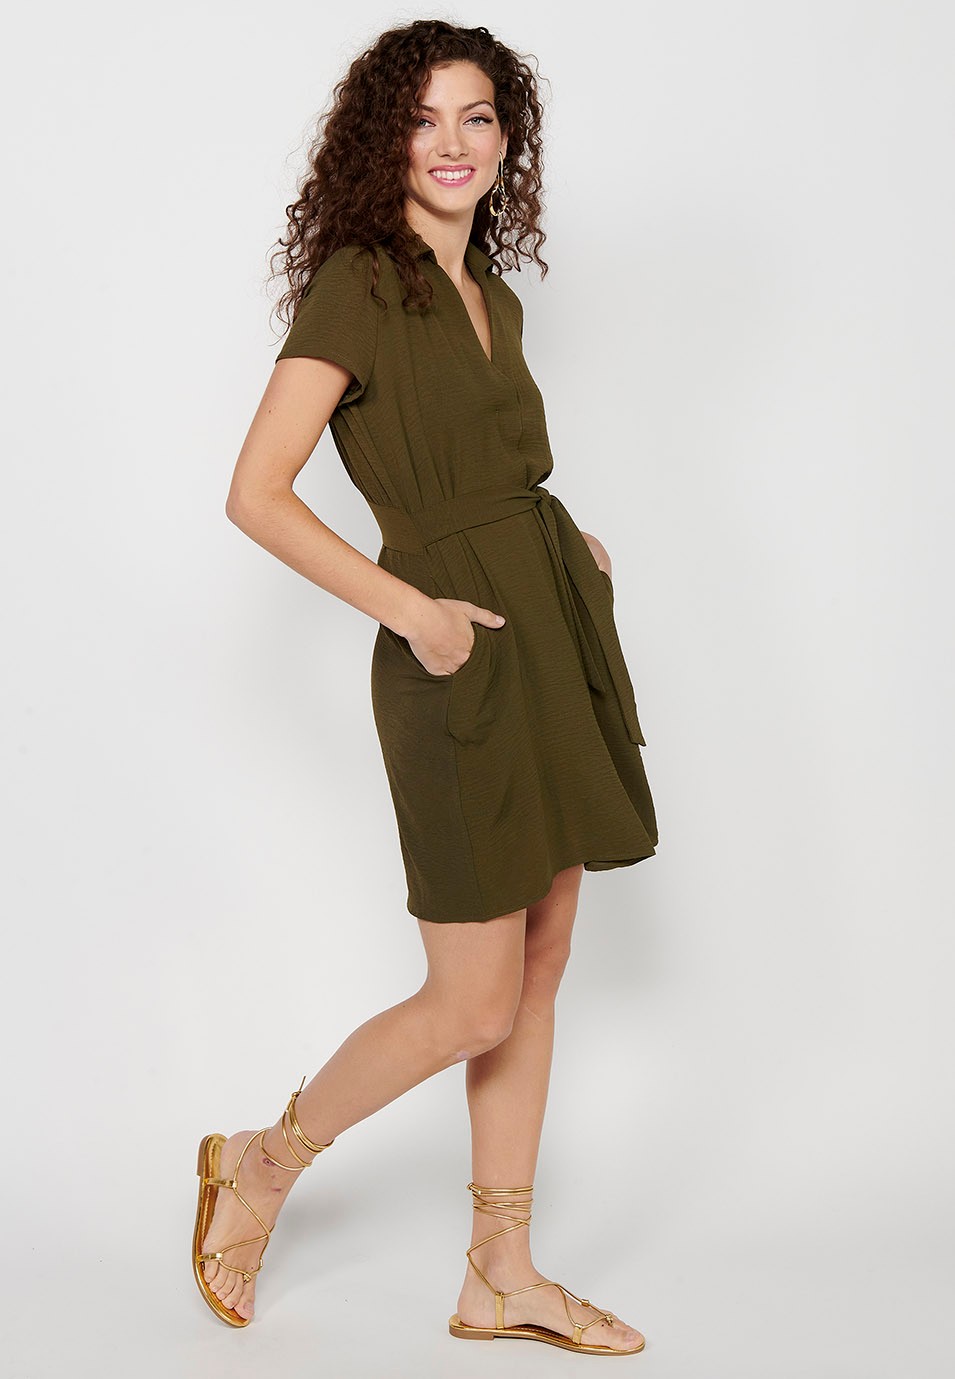 Khaki Short Sleeve Dress with V-Neck and Tight Waist for Women 3